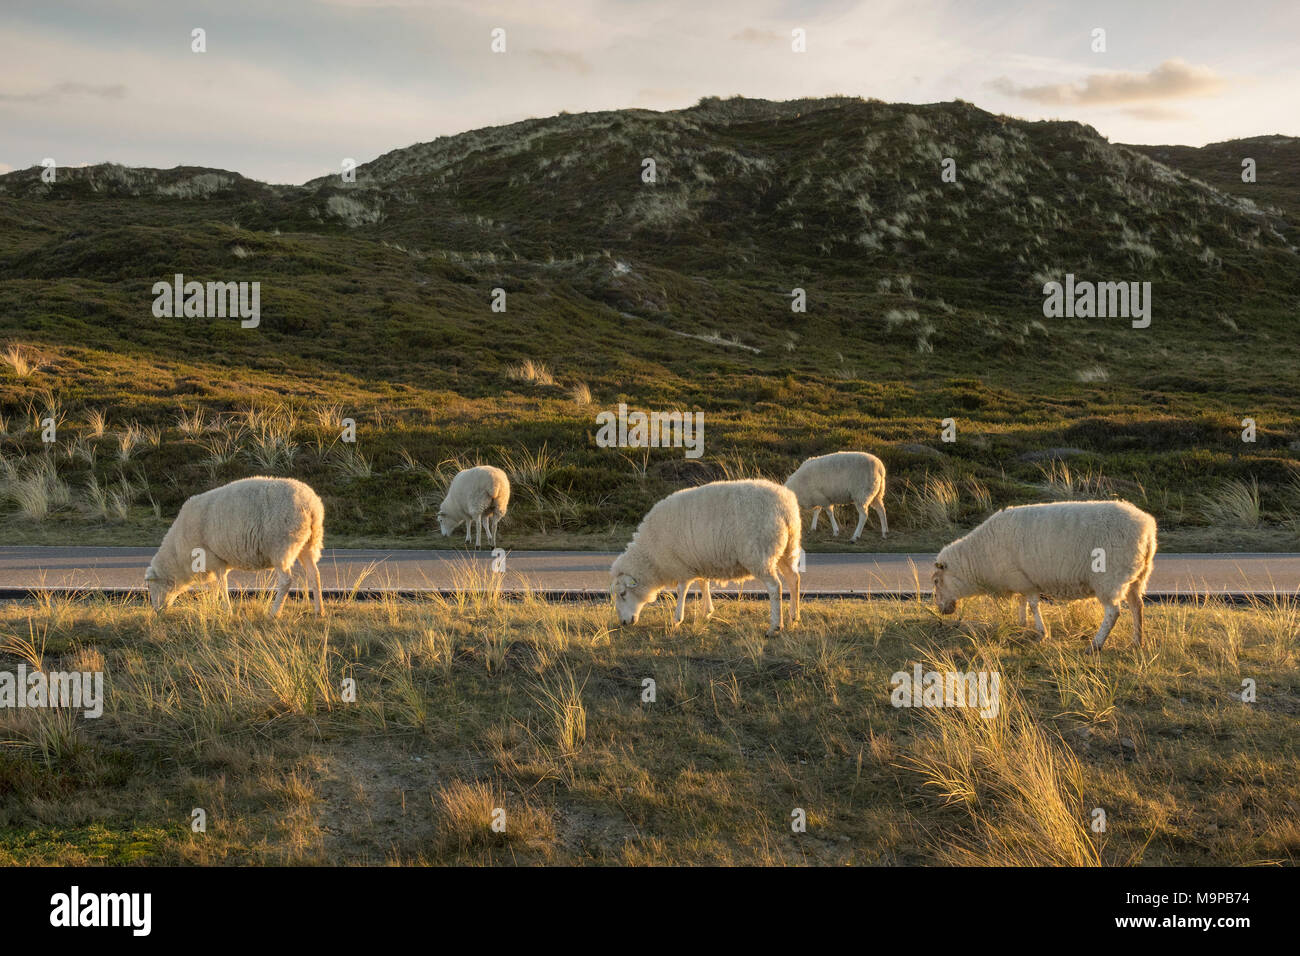 Sheep grazing at a road, Ellenbogen, North Frisia, Schleswig-Holstein, Germany Stock Photo